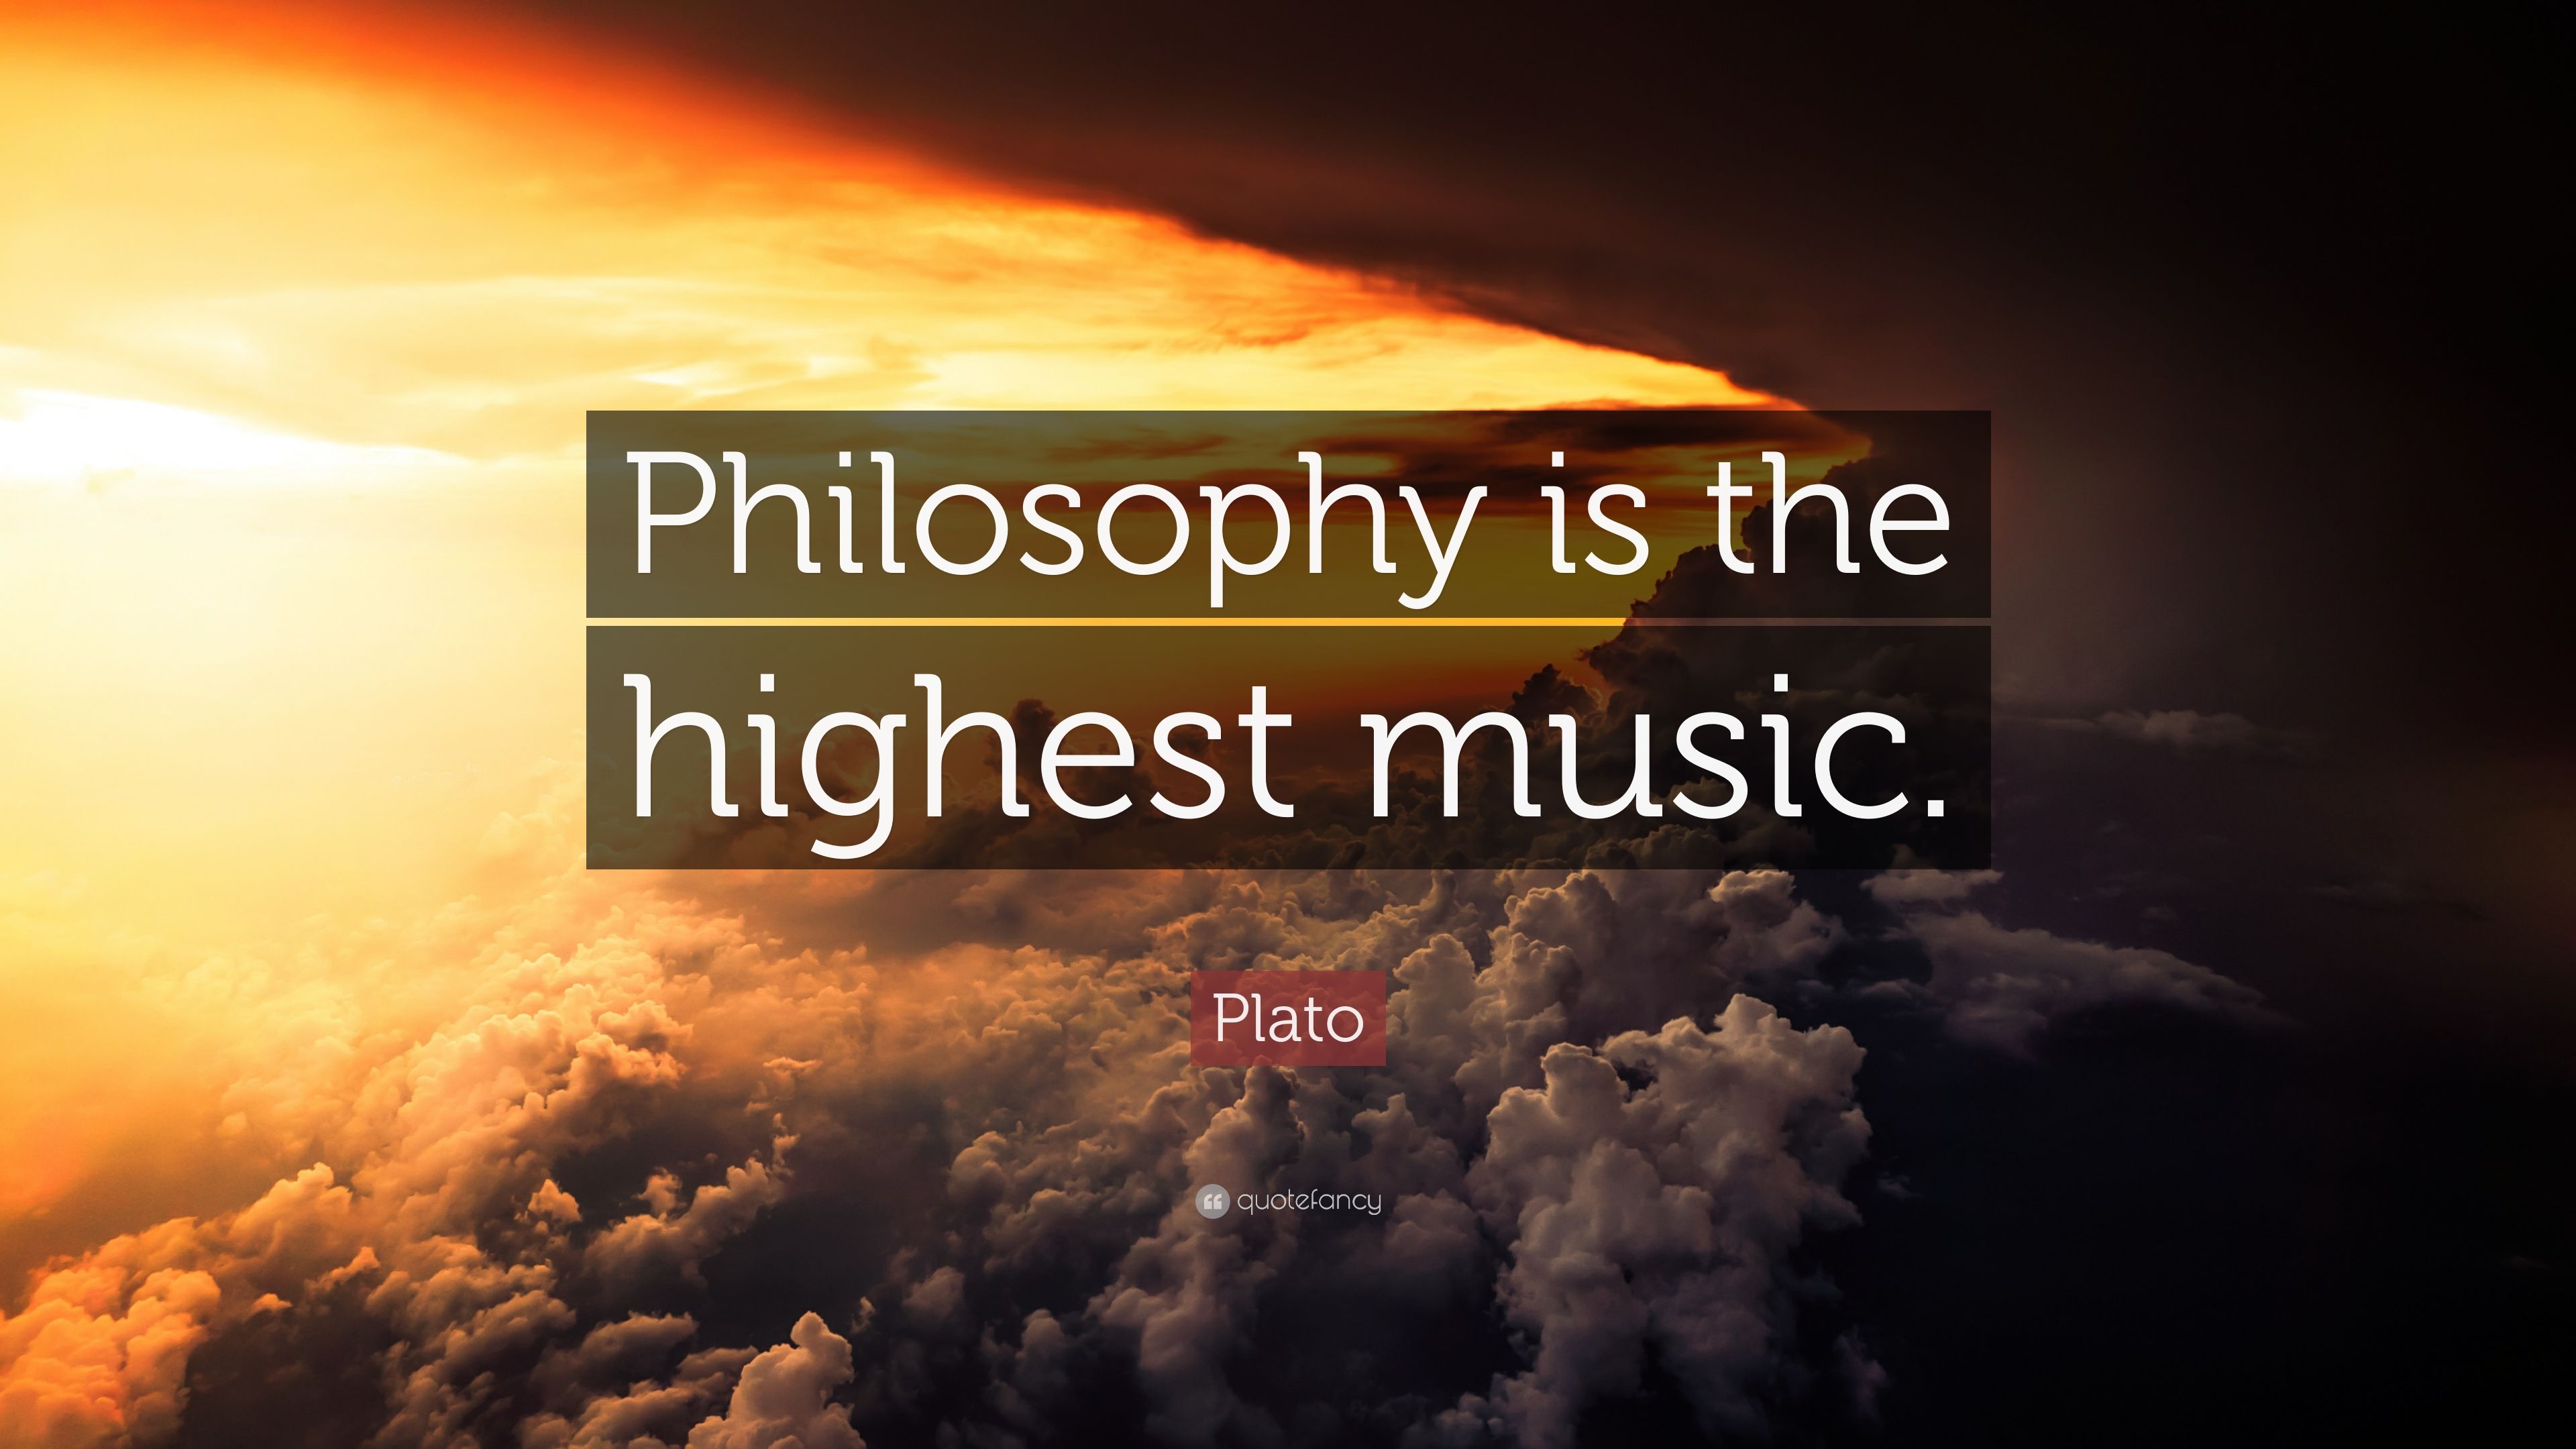 Plato Quote: “Philosophy is the highest music.” (12 wallpaper)